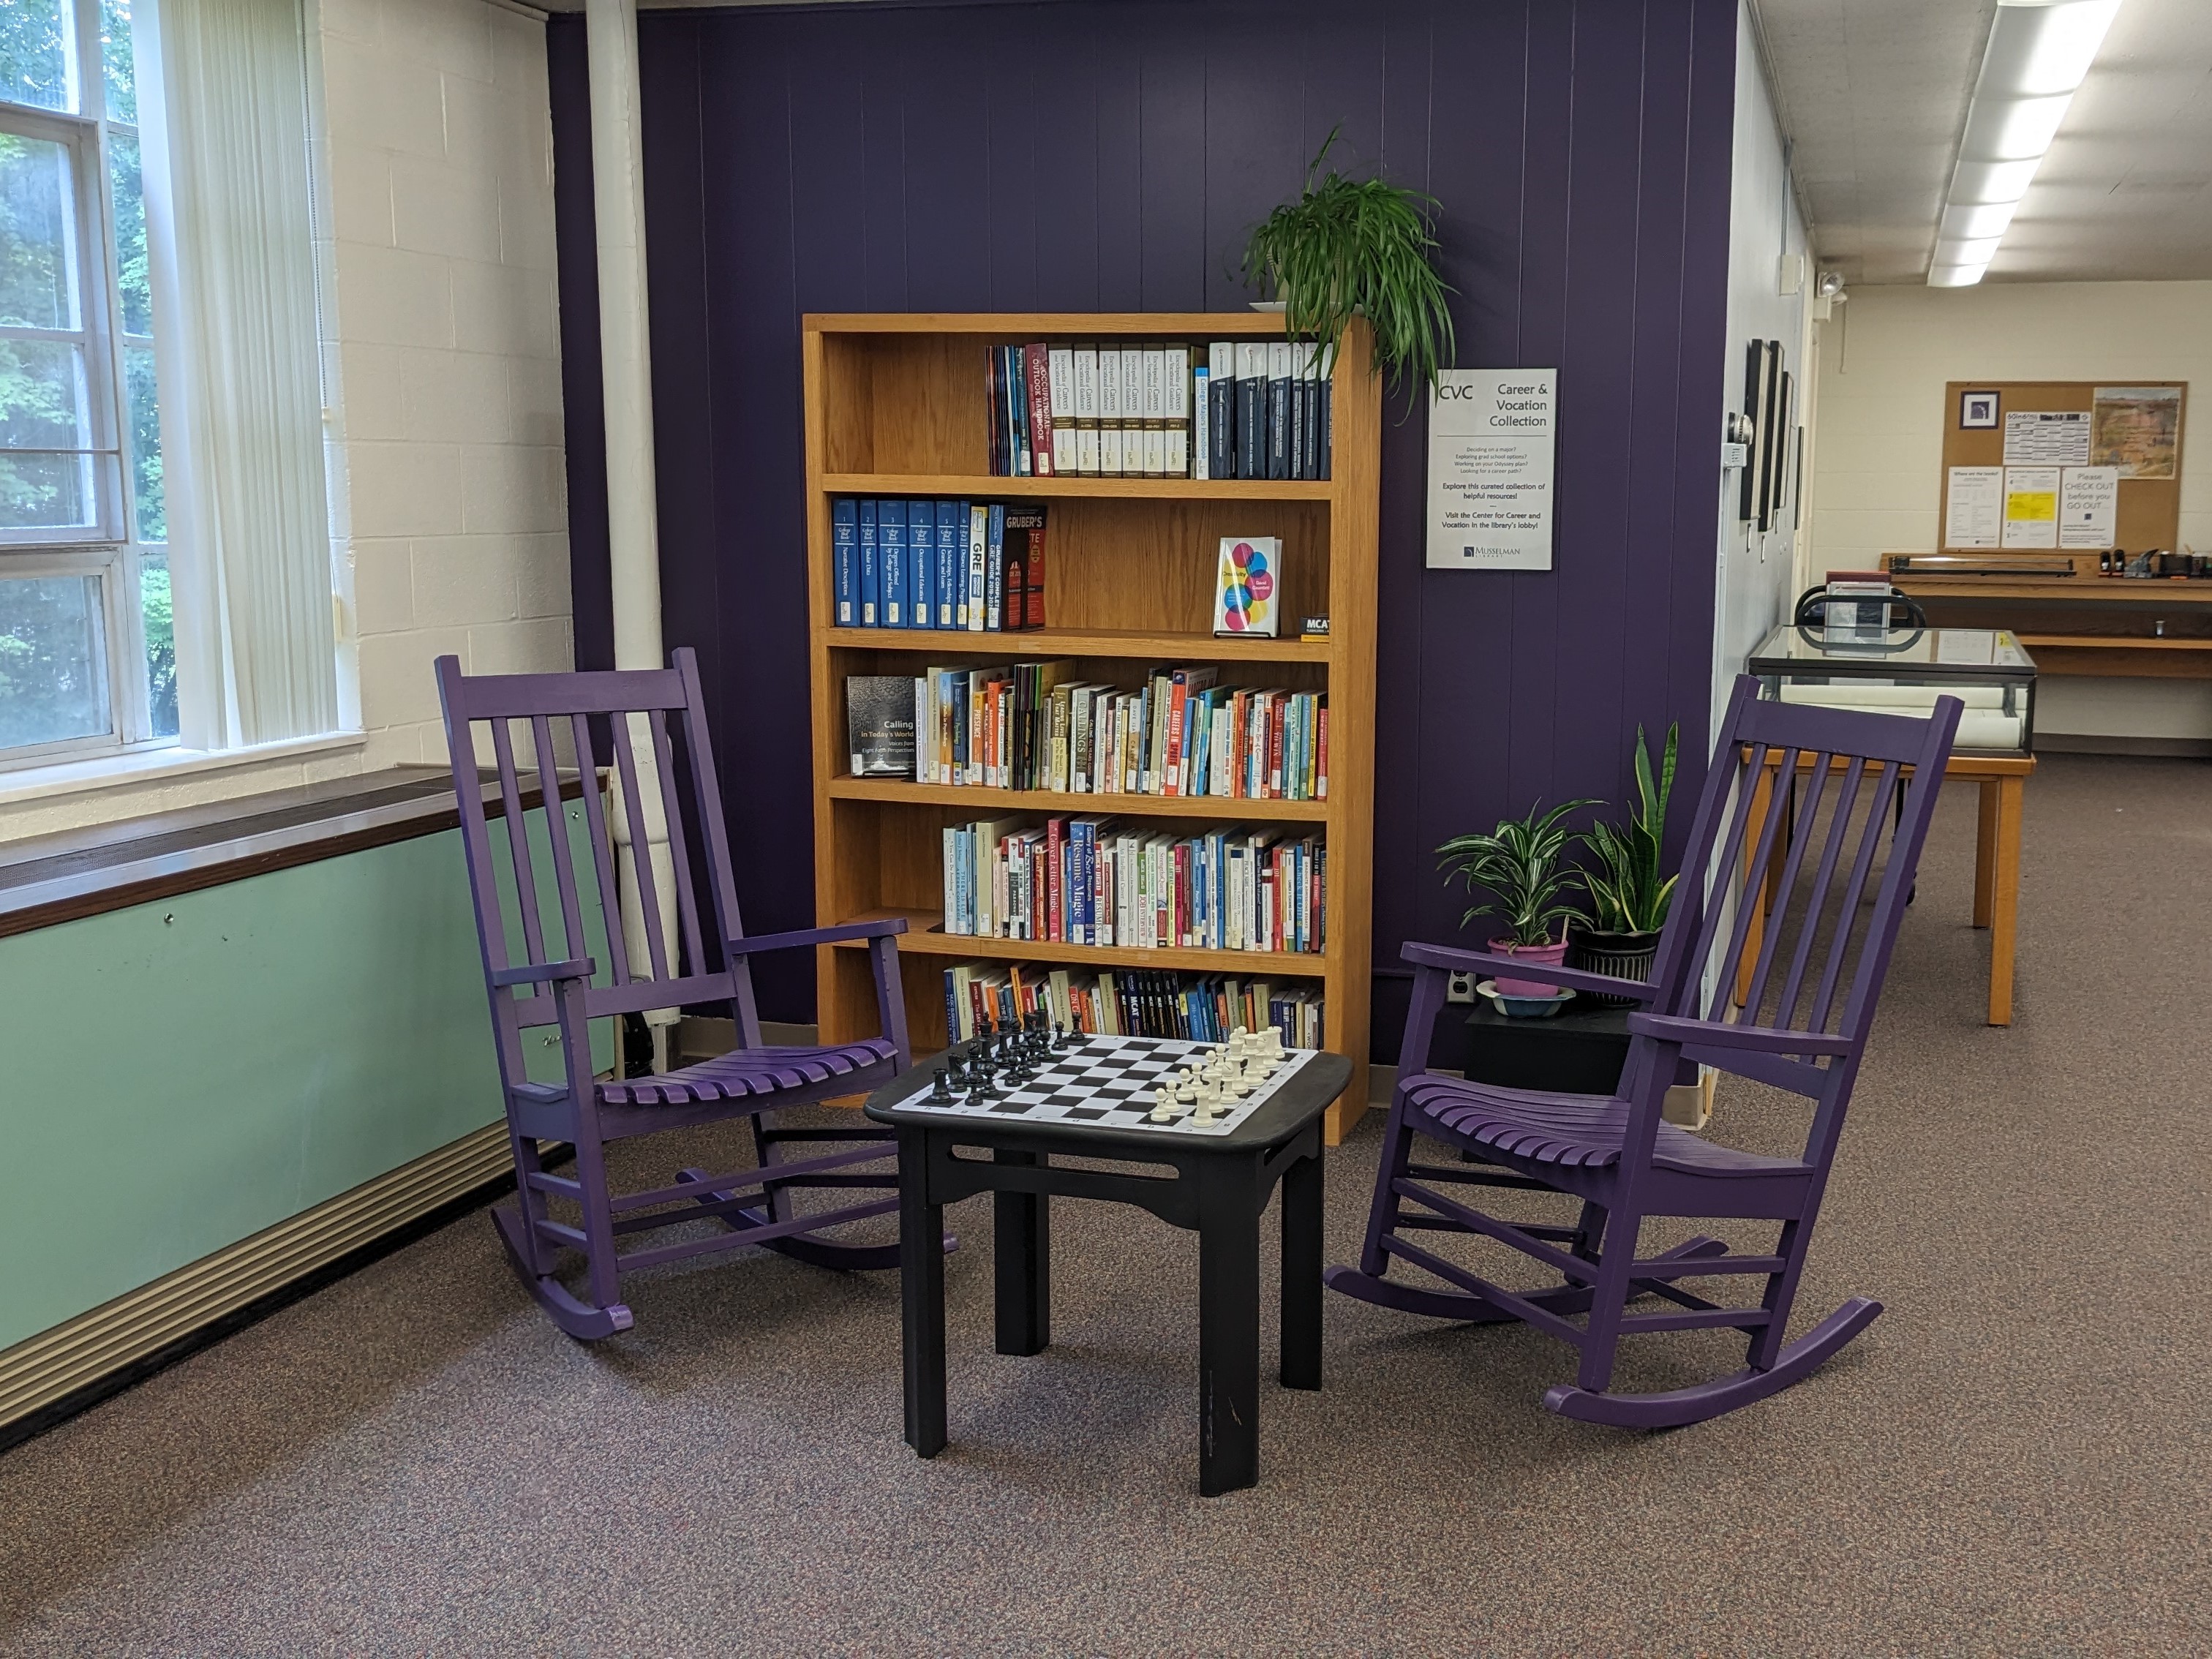 Try out our rocking chairs, and take a break with a game of chess